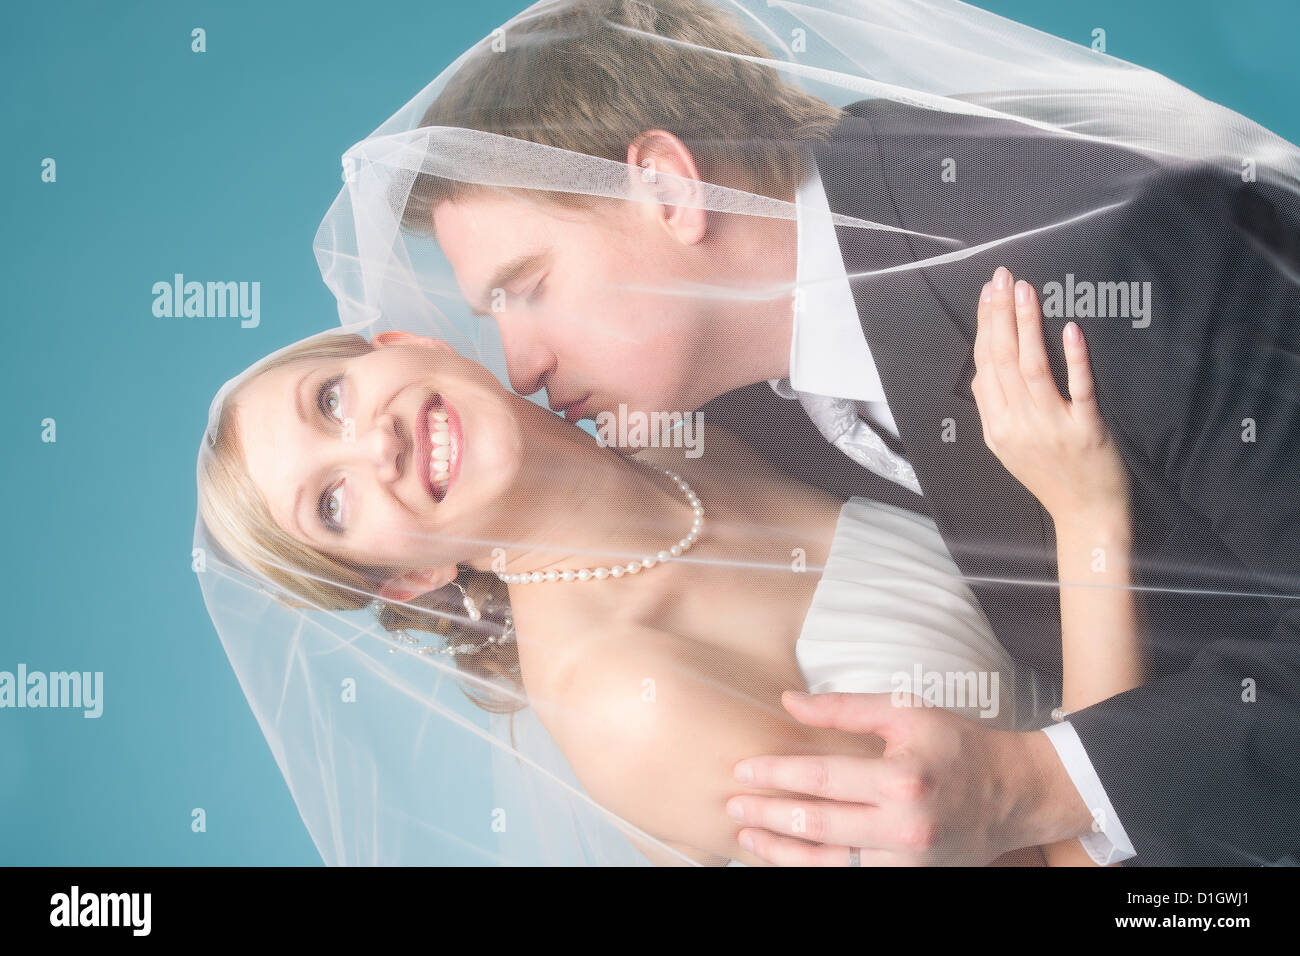 Groom give a kiss under a veil, happy bridal couple, blue background Stock Photo